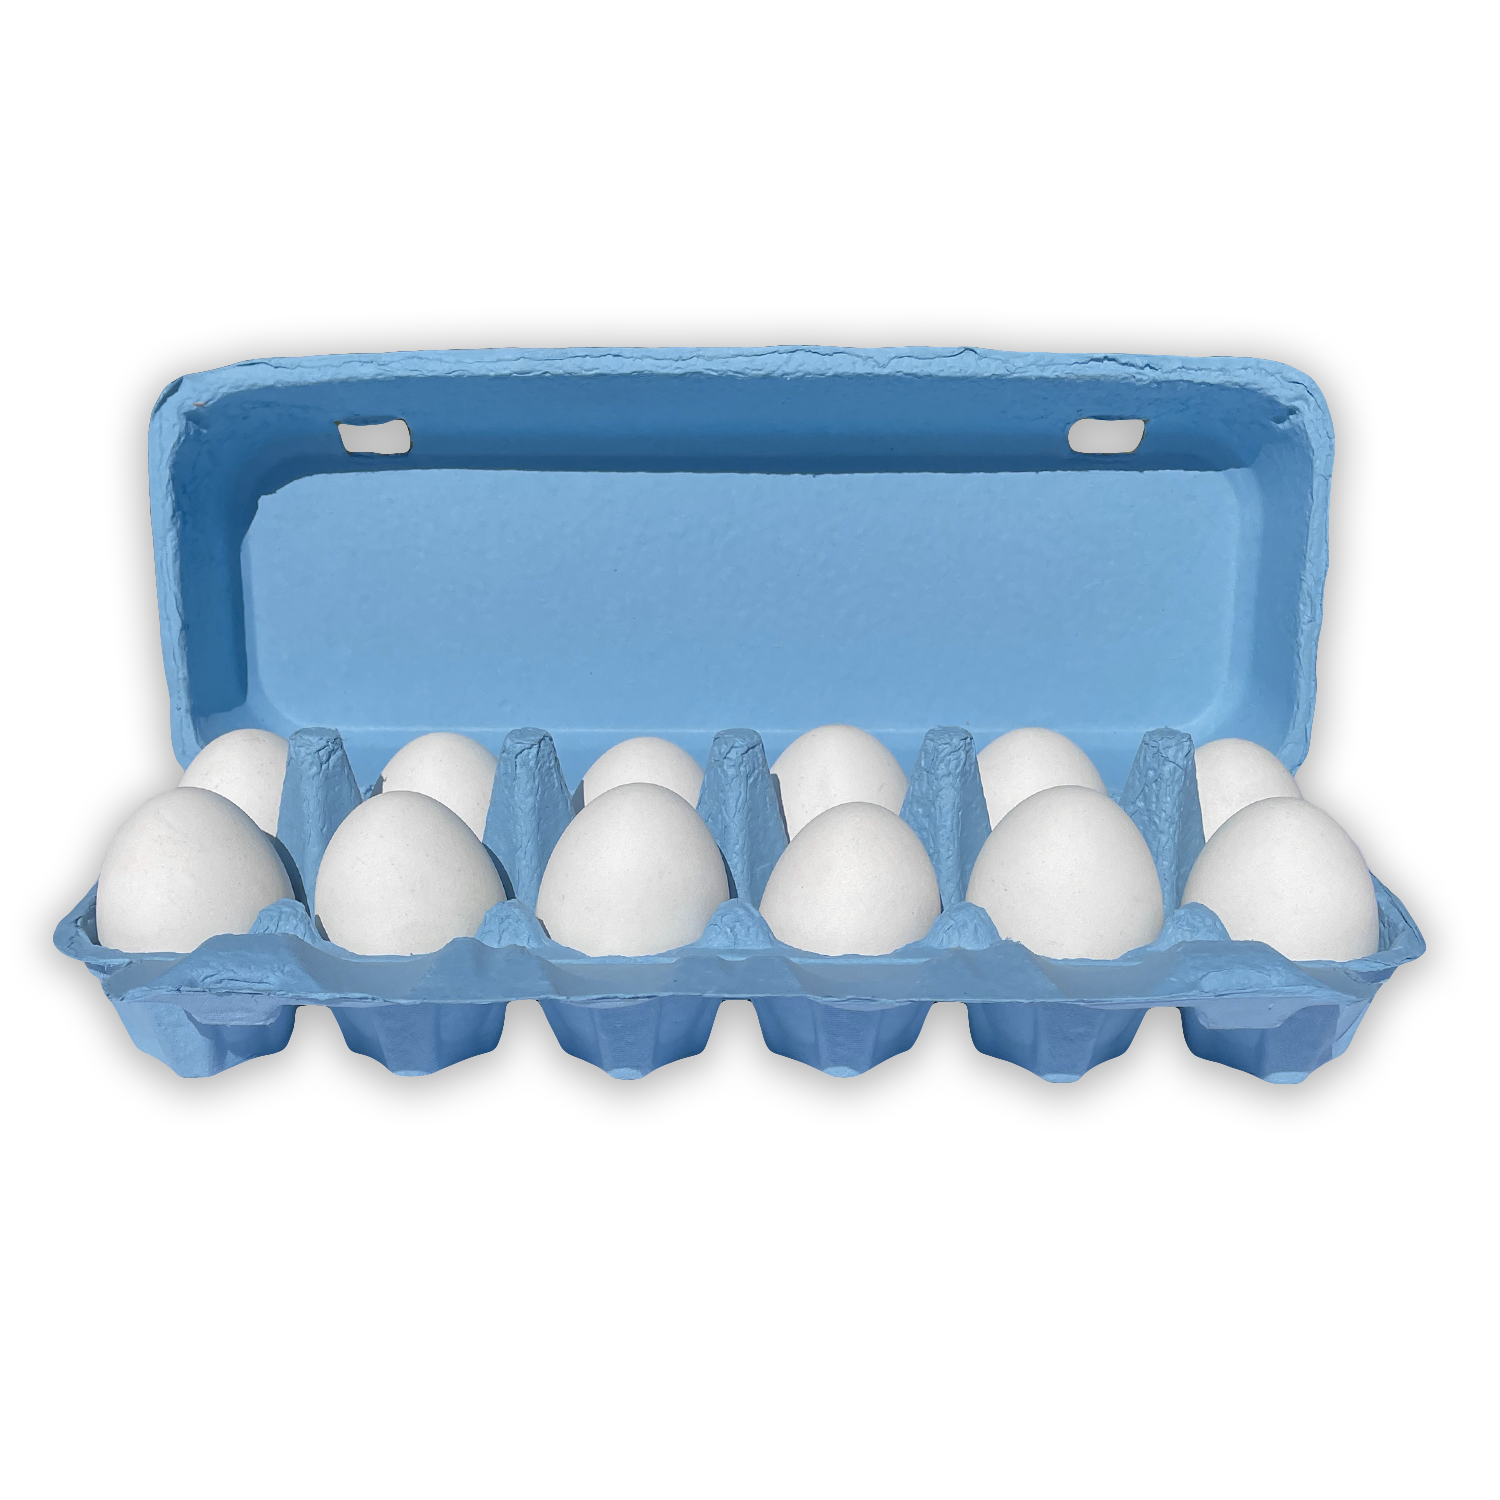 Turquoise Blue Square Paper Pulp Chicken Egg Cartons (12 eggs)